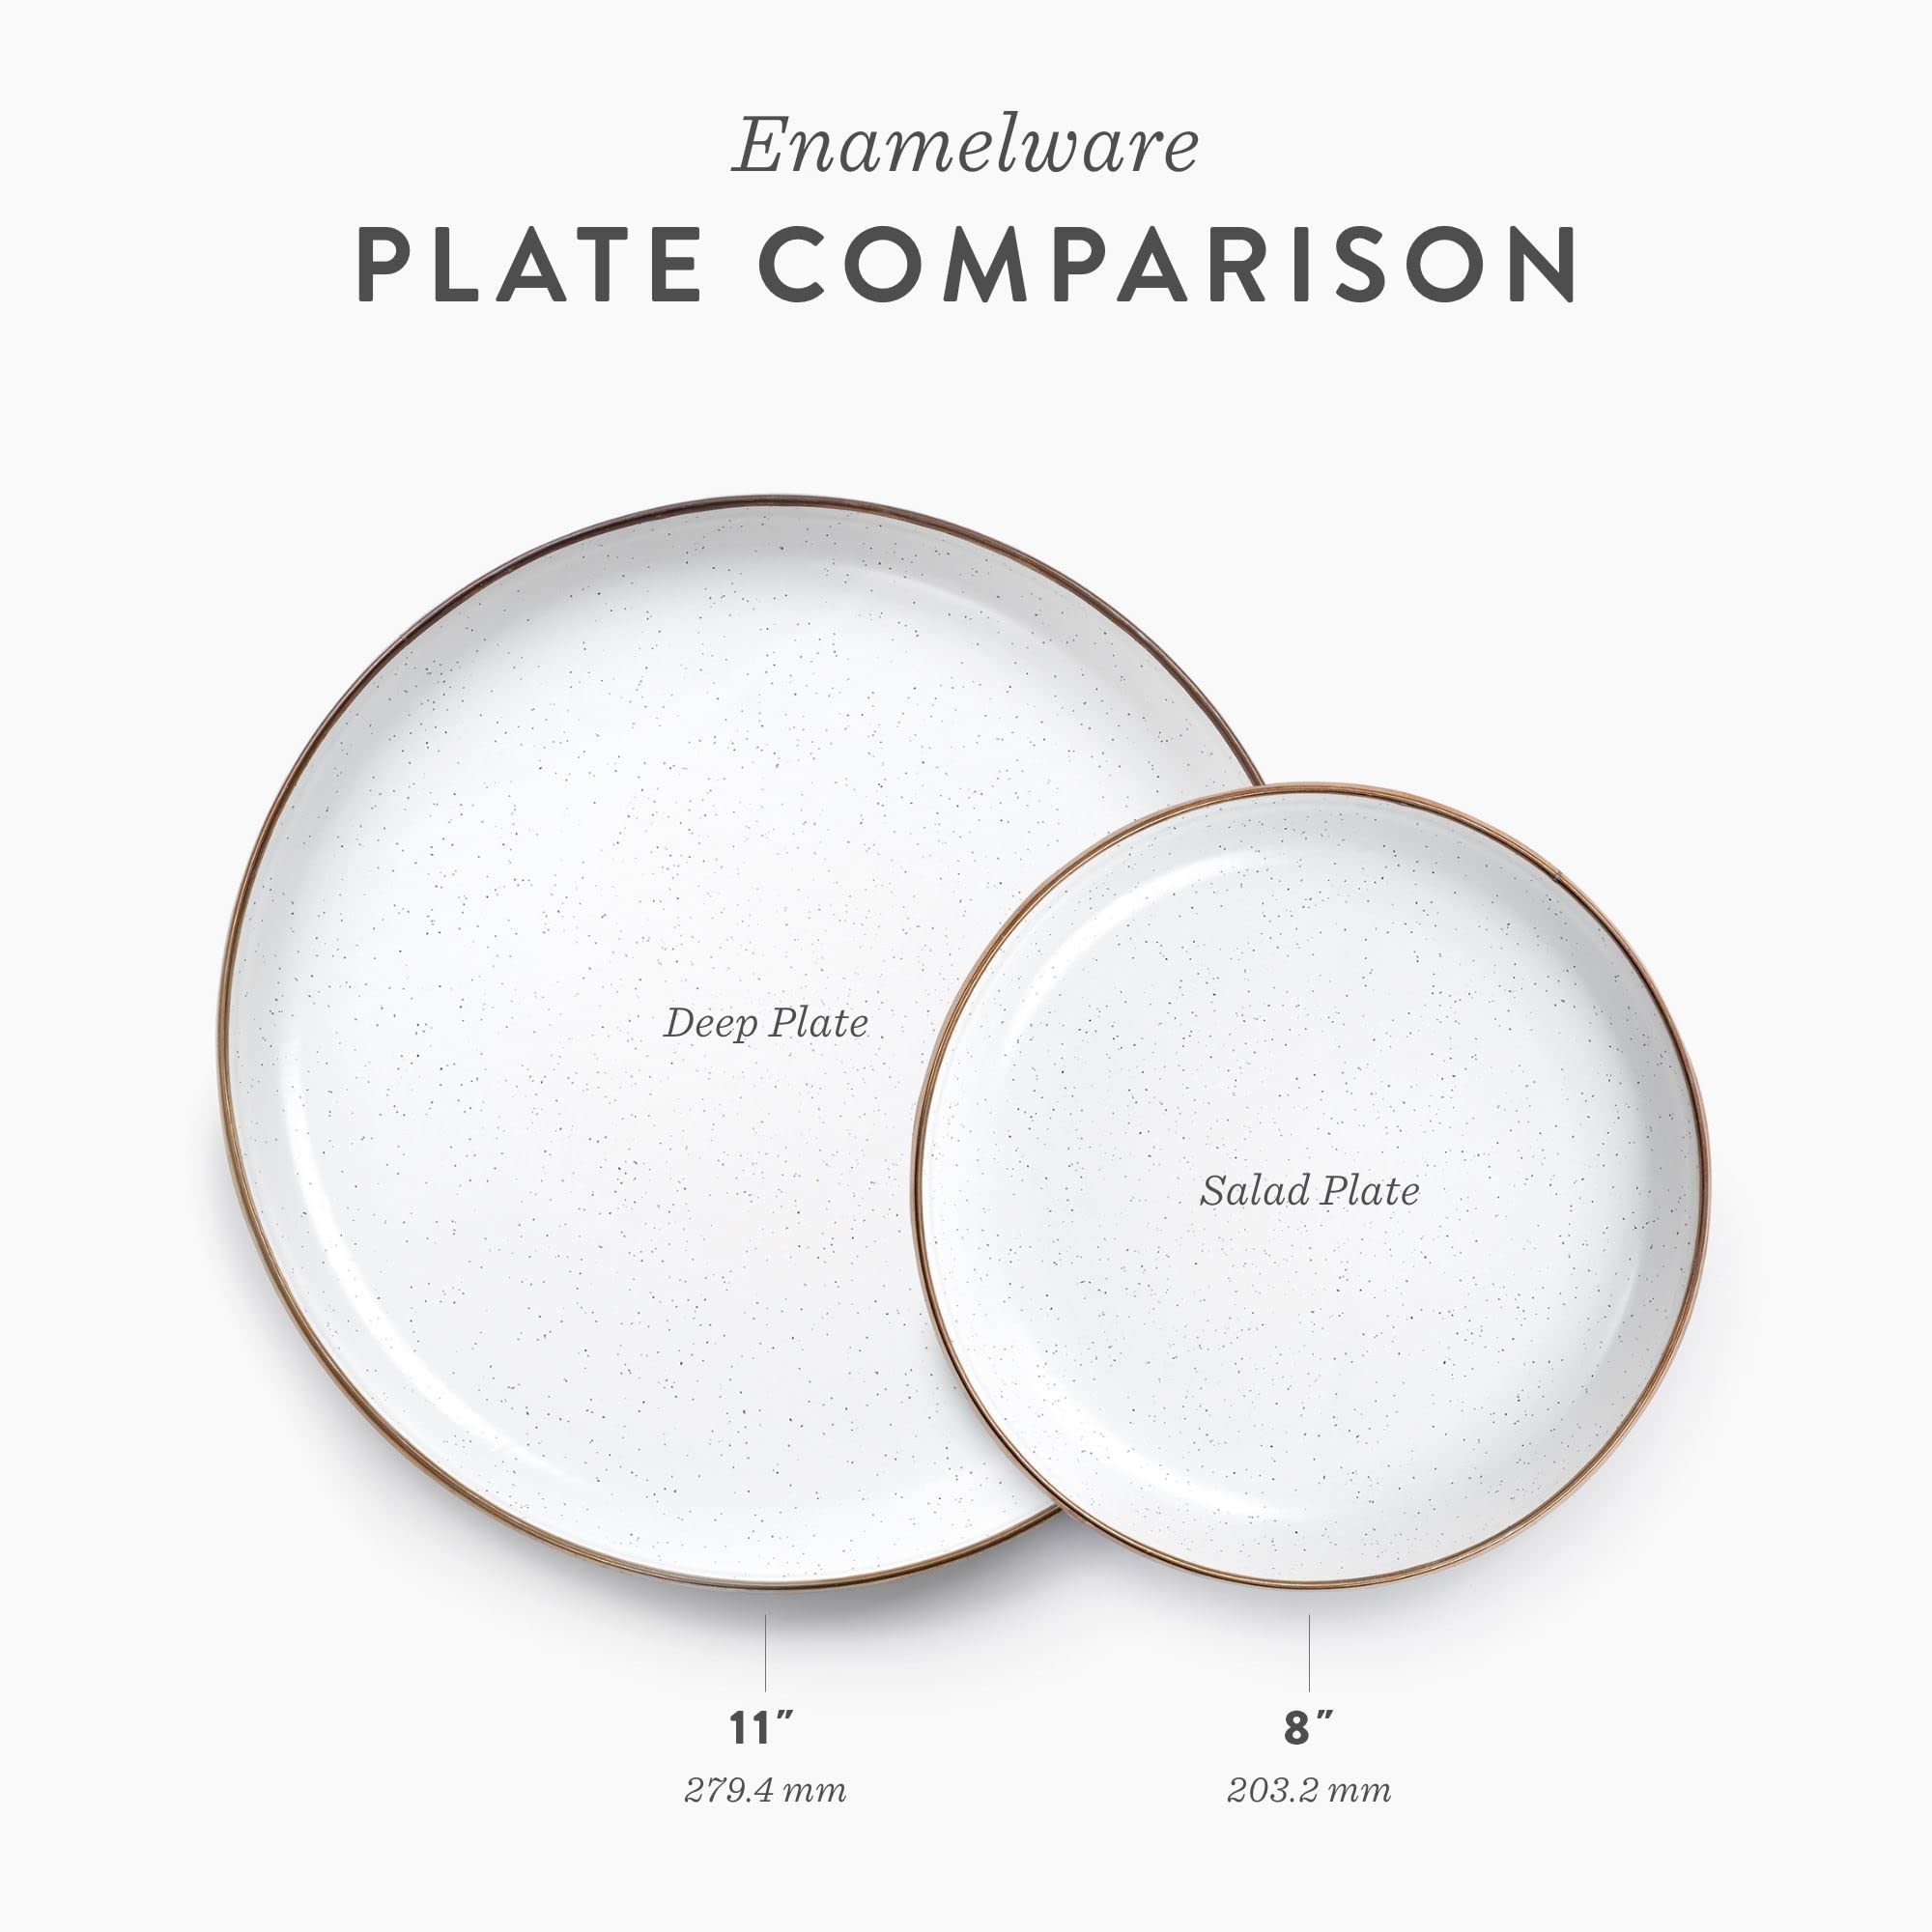 Barebones 8 Inch Salad Plate - Set of 2 Dinner Plate - Enamelware Plates - Durable Kitchen or Camping Plate - Charcoal